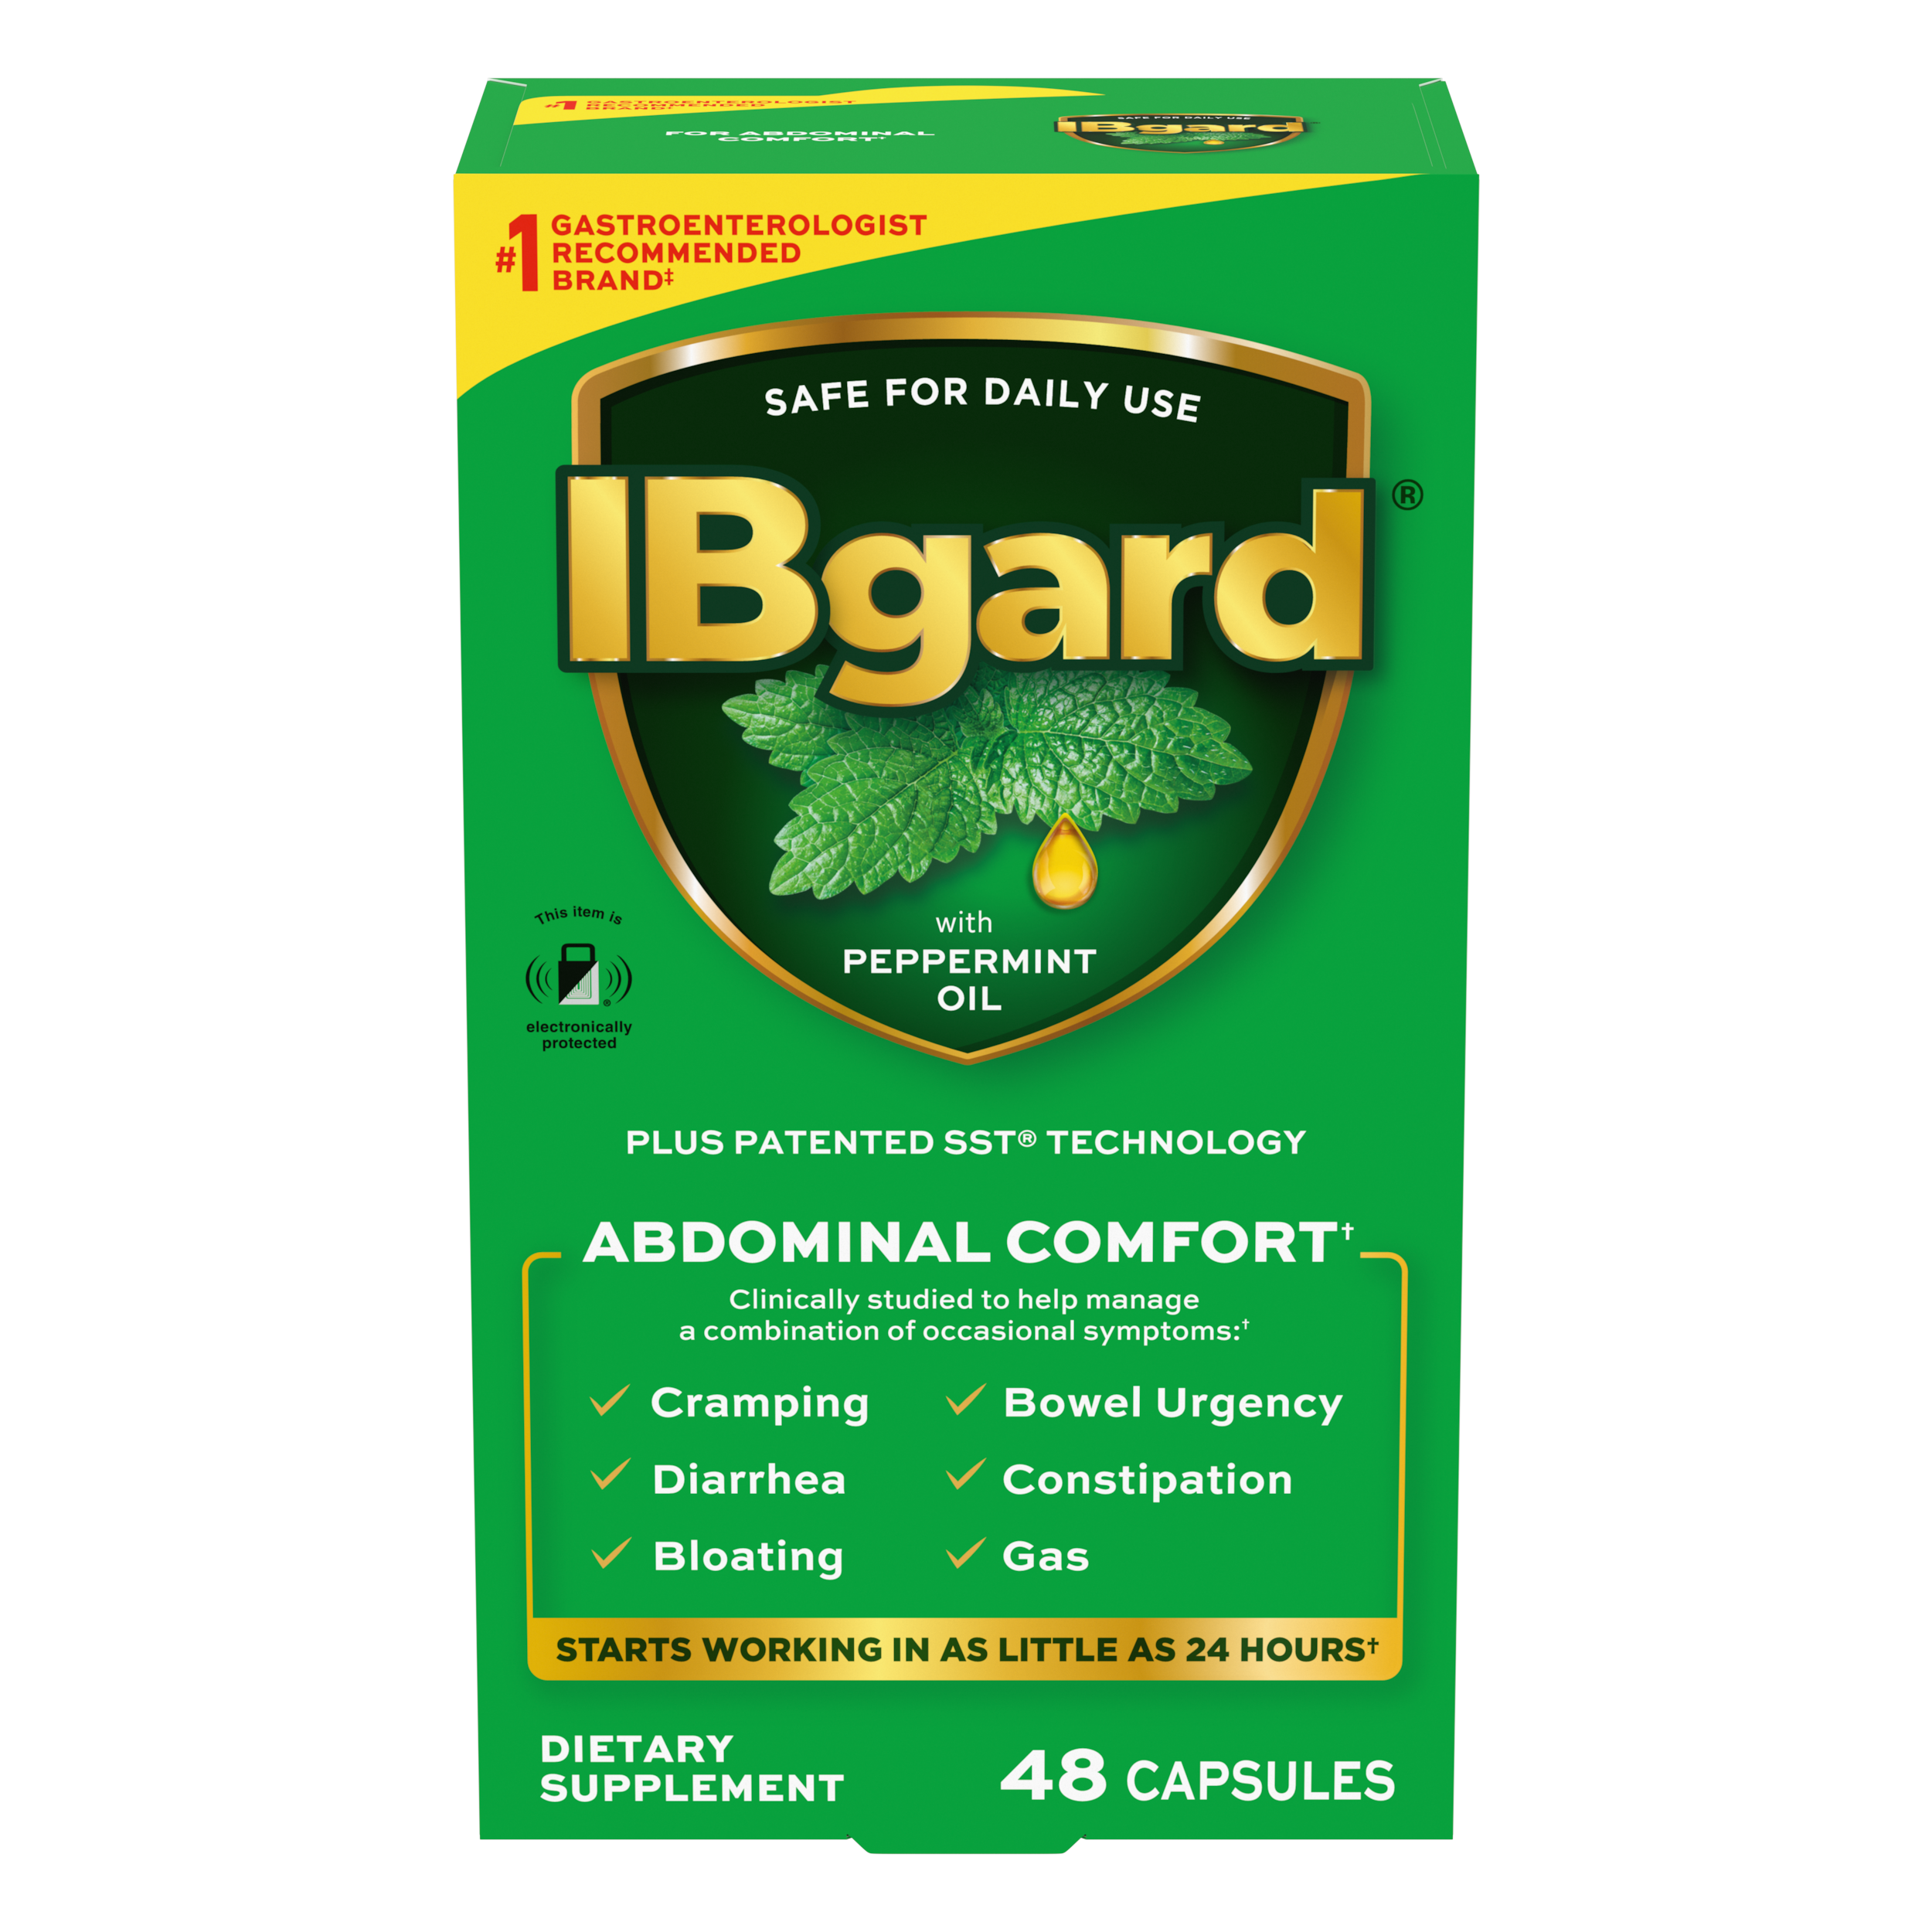 IBgard Digestive Gut Health Supplement for a Combination of Occasional Symptoms: Cramping, Bowel Urgency, Diarrhea, Constipation, Bloating & Gas, 48ct (Packaging May Vary) - image 2 of 9